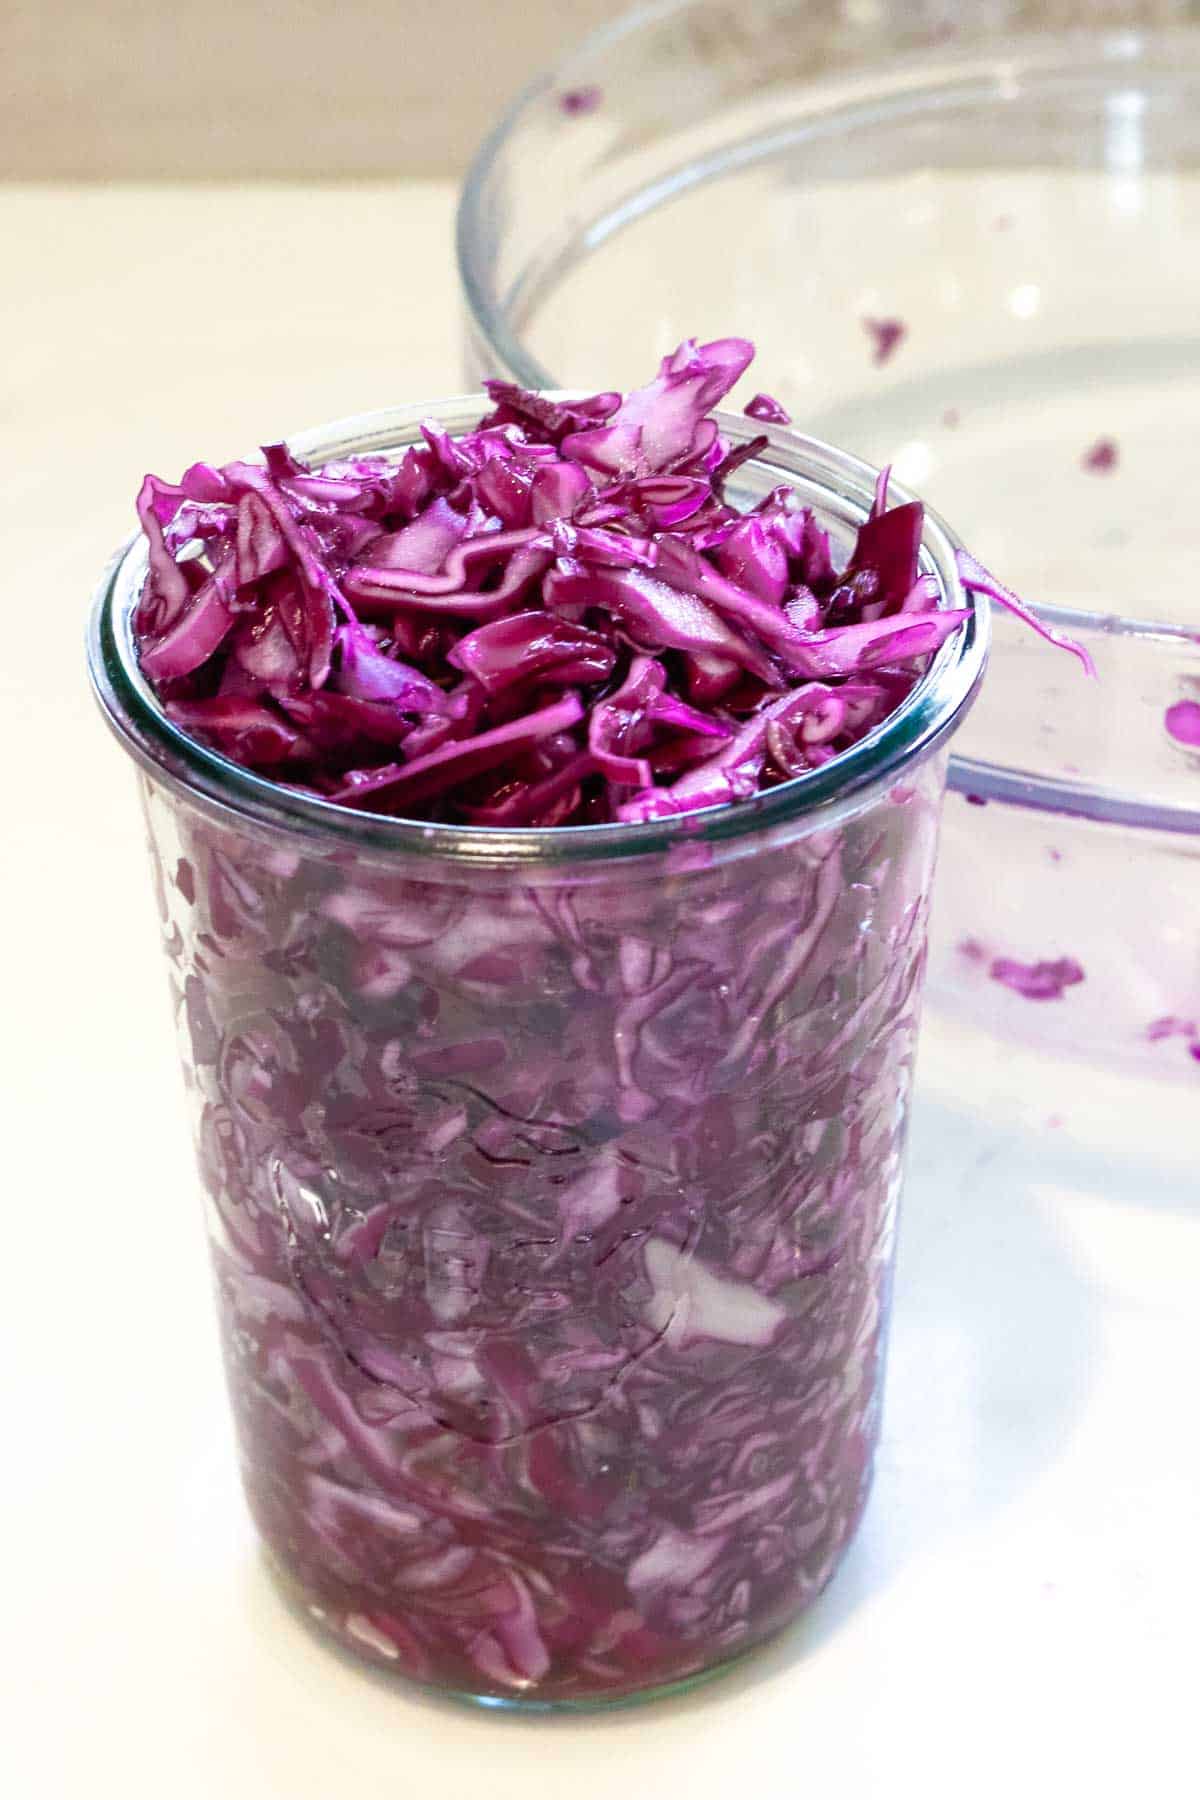 red cabbage transferred to weck jar.